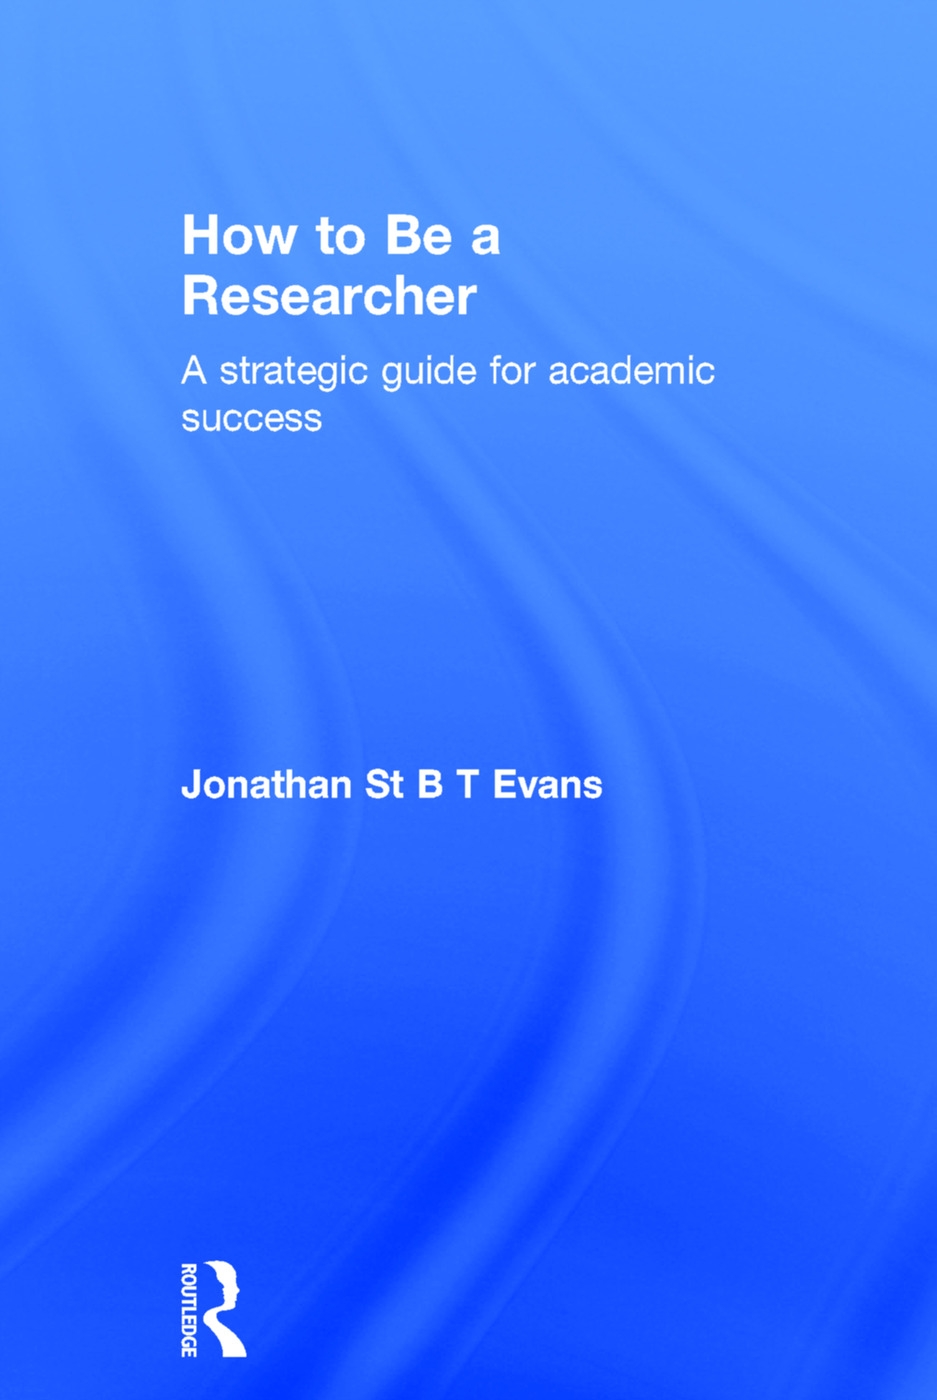 How to Be a Researcher: A Strategic Guide for Academic Success